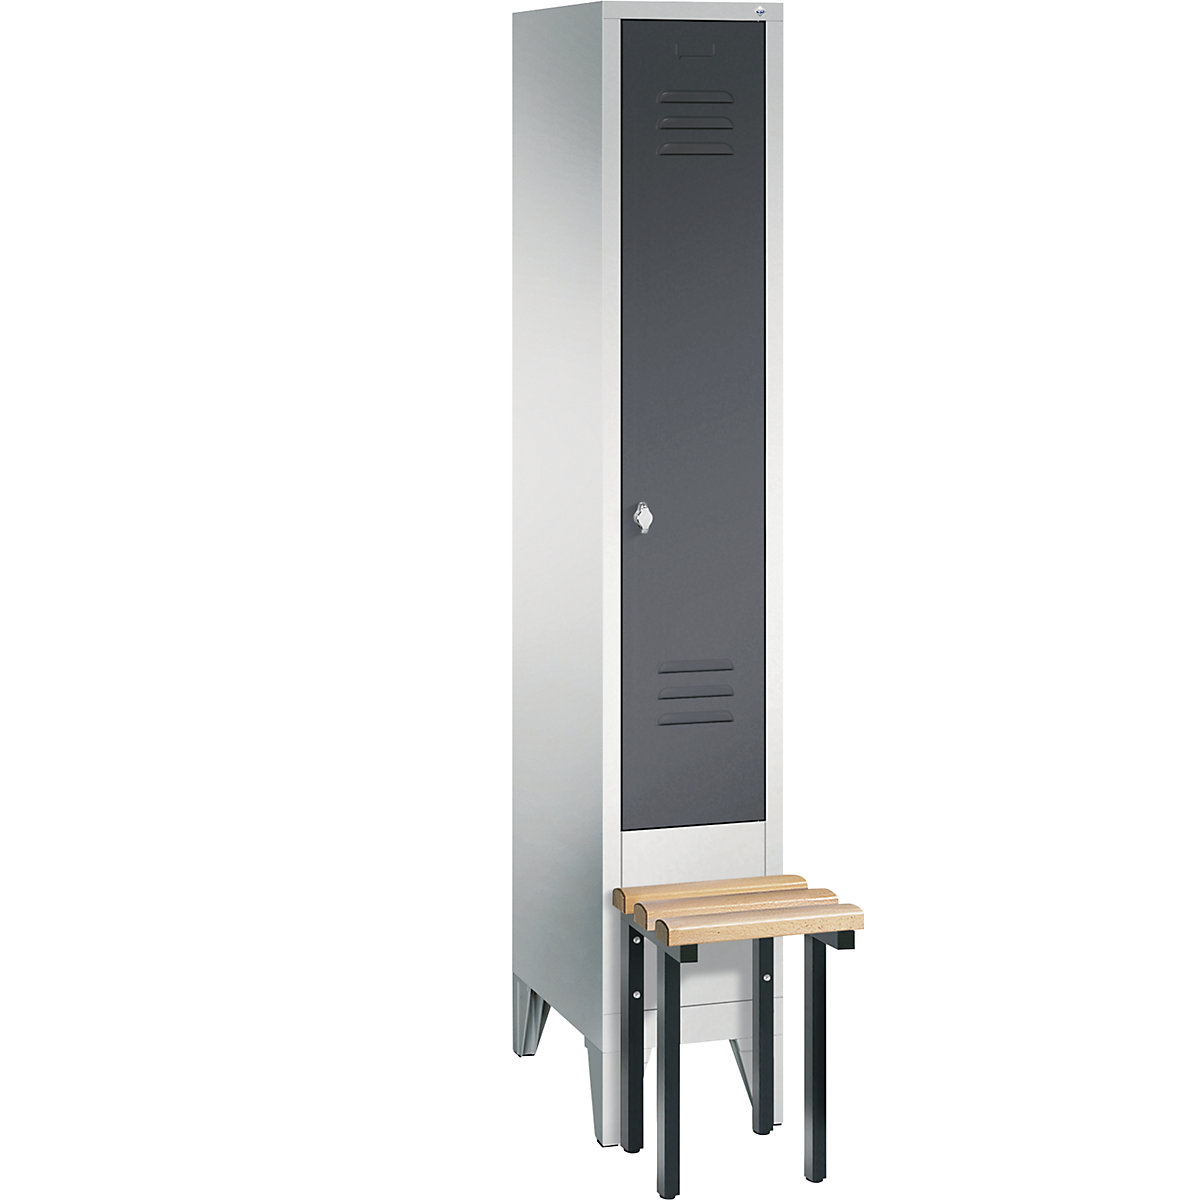 CLASSIC cloakroom locker with bench mounted in front – C+P, 1 compartment, compartment width 300 mm, light grey / black grey-4